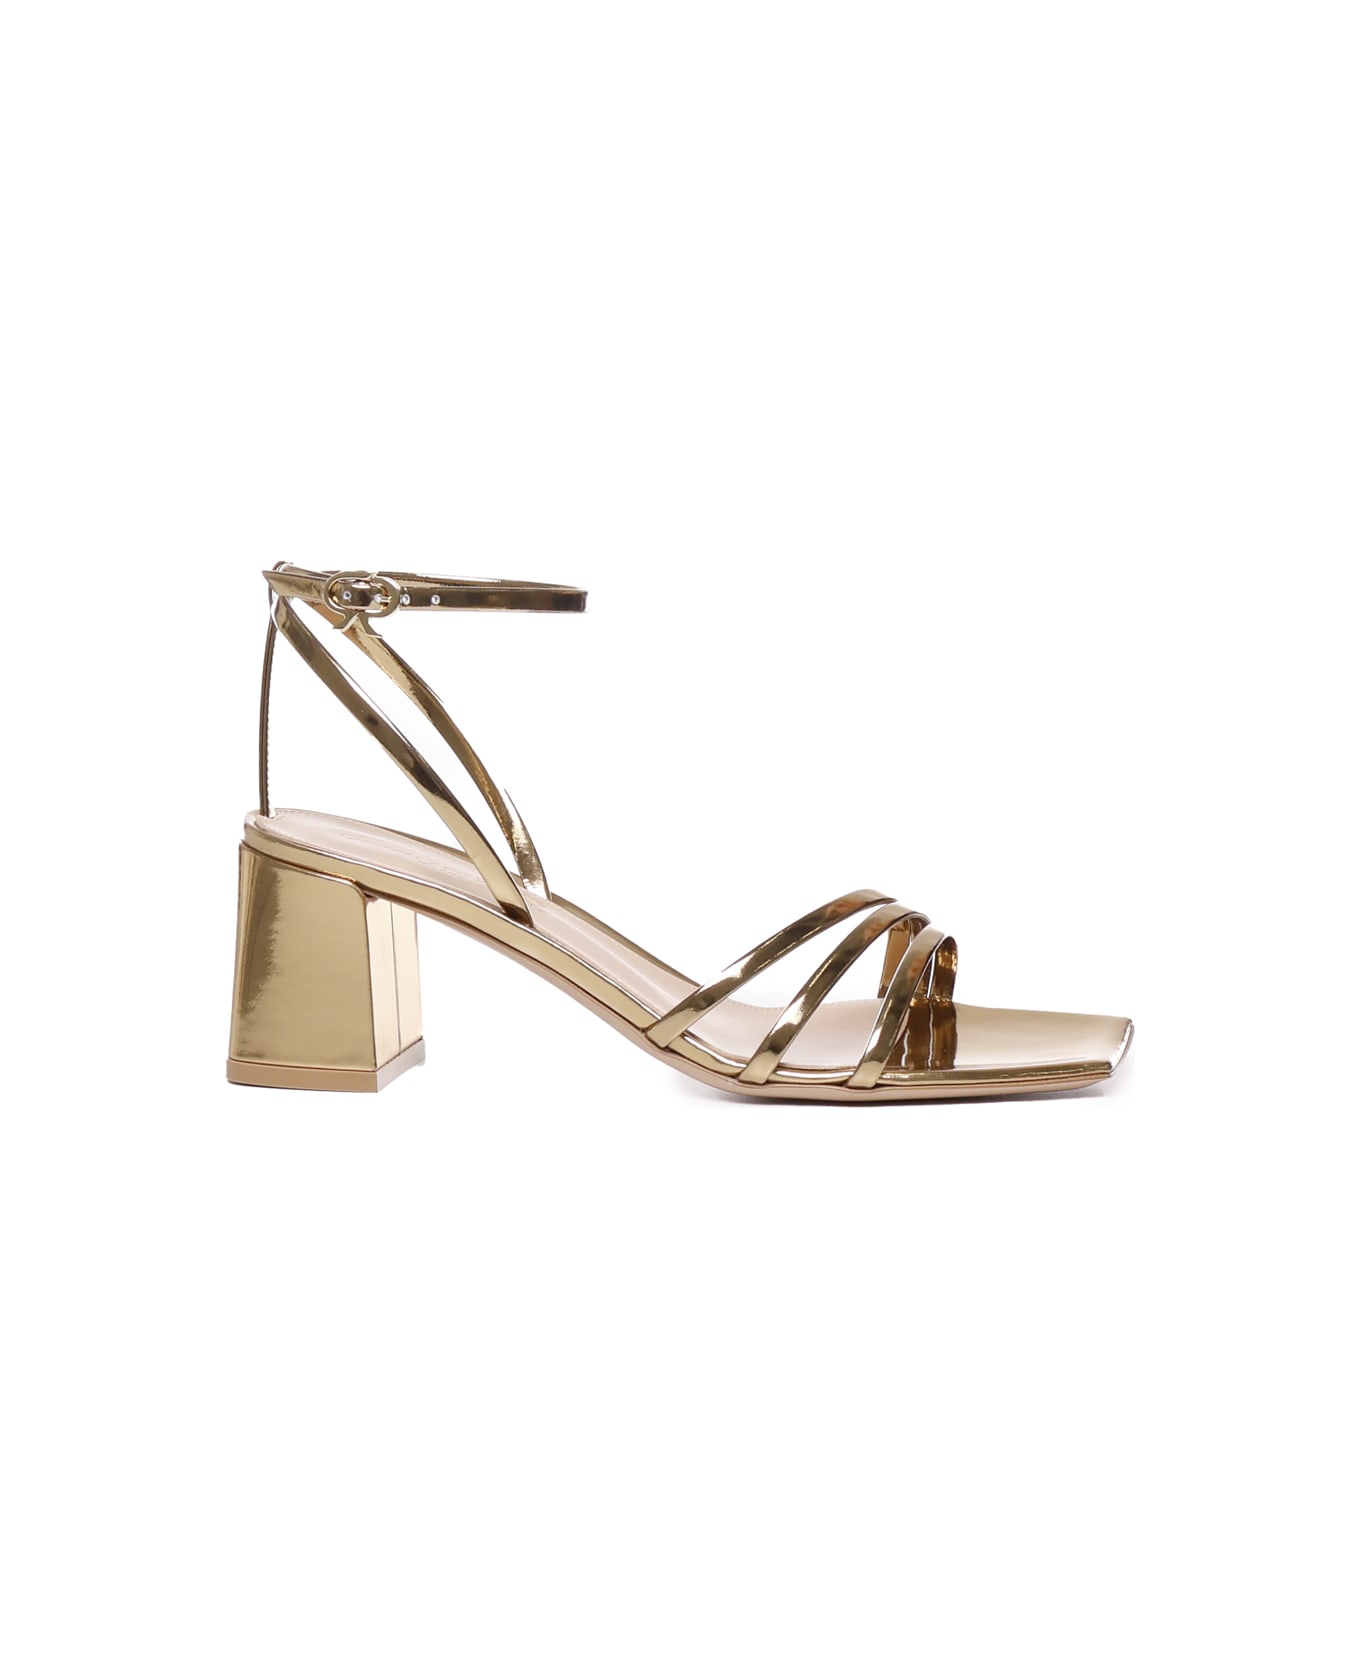 Gianvito Rossi Patent Leather Sandals - Mekong サンダル